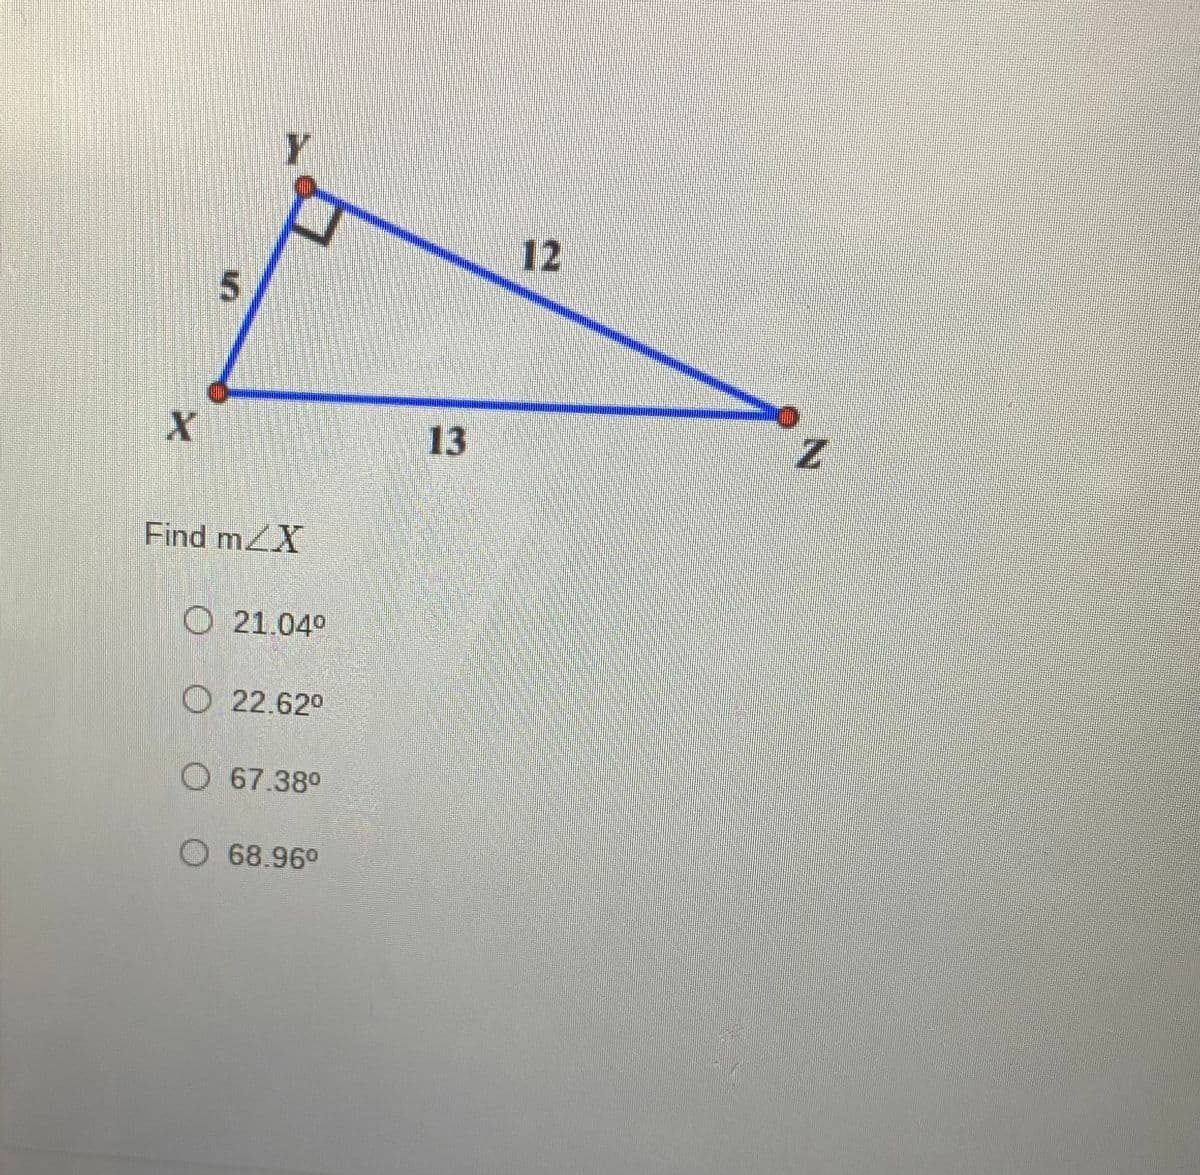 ### Geometry Exercise: Finding an Angle in a Triangle

In the diagram, we have a triangle XYZ. The sides of the triangle are labeled as follows:
- Side XY = 5 units
- Side YZ = 12 units
- Side XZ = 13 units

Point Y has a right angle (indicated by a small square). This means triangle XYZ is a right triangle. Given this information, you are asked to find the measure of angle ∠X.

The options provided are:
- 21.04°
- 22.62°
- 67.38°
- 68.96°

### Detailed Explanation:

1. **Right Triangle Properties:** 
   - In a right triangle, the side opposite the right angle (90°) is the hypotenuse. In this triangle, XZ is the hypotenuse with a length of 13 units.
   - The other two sides are known as the legs. Here, XY = 5 units and YZ = 12 units.

2. **Using Trigonometric Ratios:**
   - To determine angle ∠X, we can use the trigonometric functions sine (sin), cosine (cos), or tangent (tan). For right triangle calculations, these functions relate the angles to the lengths of the sides:
     - sine: \(\sin(\theta) = \frac{\text{opposite side}}{\text{hypotenuse}}\)
     - cosine: \(\cos(\theta) = \frac{\text{adjacent side}}{\text{hypotenuse}}\)
     - tangent: \(\tan(\theta) = \frac{\text{opposite side}}{\text{adjacent side}}\)

3. **Calculation for Angle ∠X:**
   - To find angle ∠X at vertex X, we use the legs XY and YZ since they are known:
     - \(\tan(\angle X) = \frac{YZ}{XY} = \frac{12}{5}\)

   - Finding the angle:
     - \(\angle X = \tan^{-1}(\frac{12}{5})\)

4. **Using a Calculator:**
   - Use a scientific calculator or an online calculator to find the inverse tangent value (tan^-1).
   - \(\angle X \approx 67.38°\)

Therefore, the correct answer for the measure of angle ∠X is:

- **67